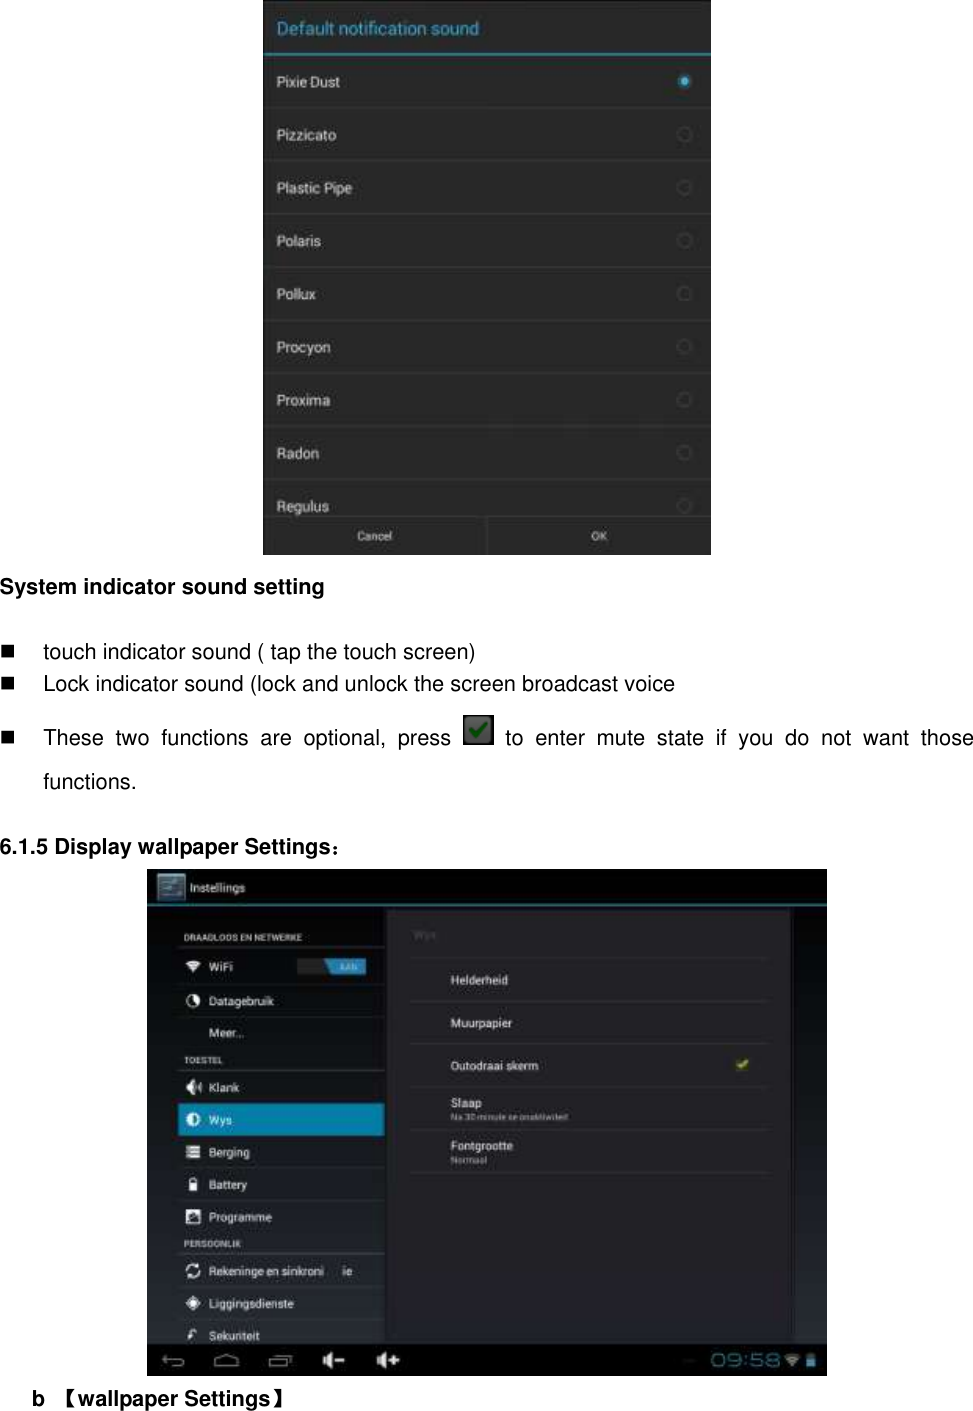  System indicator sound setting    touch indicator sound ( tap the touch screen)   Lock indicator sound (lock and unlock the screen broadcast voice   These  two  functions  are  optional,  press    to  enter  mute  state  if  you  do  not  want  those functions.    6.1.5 Display wallpaper Settings：  b  【wallpaper Settings】 